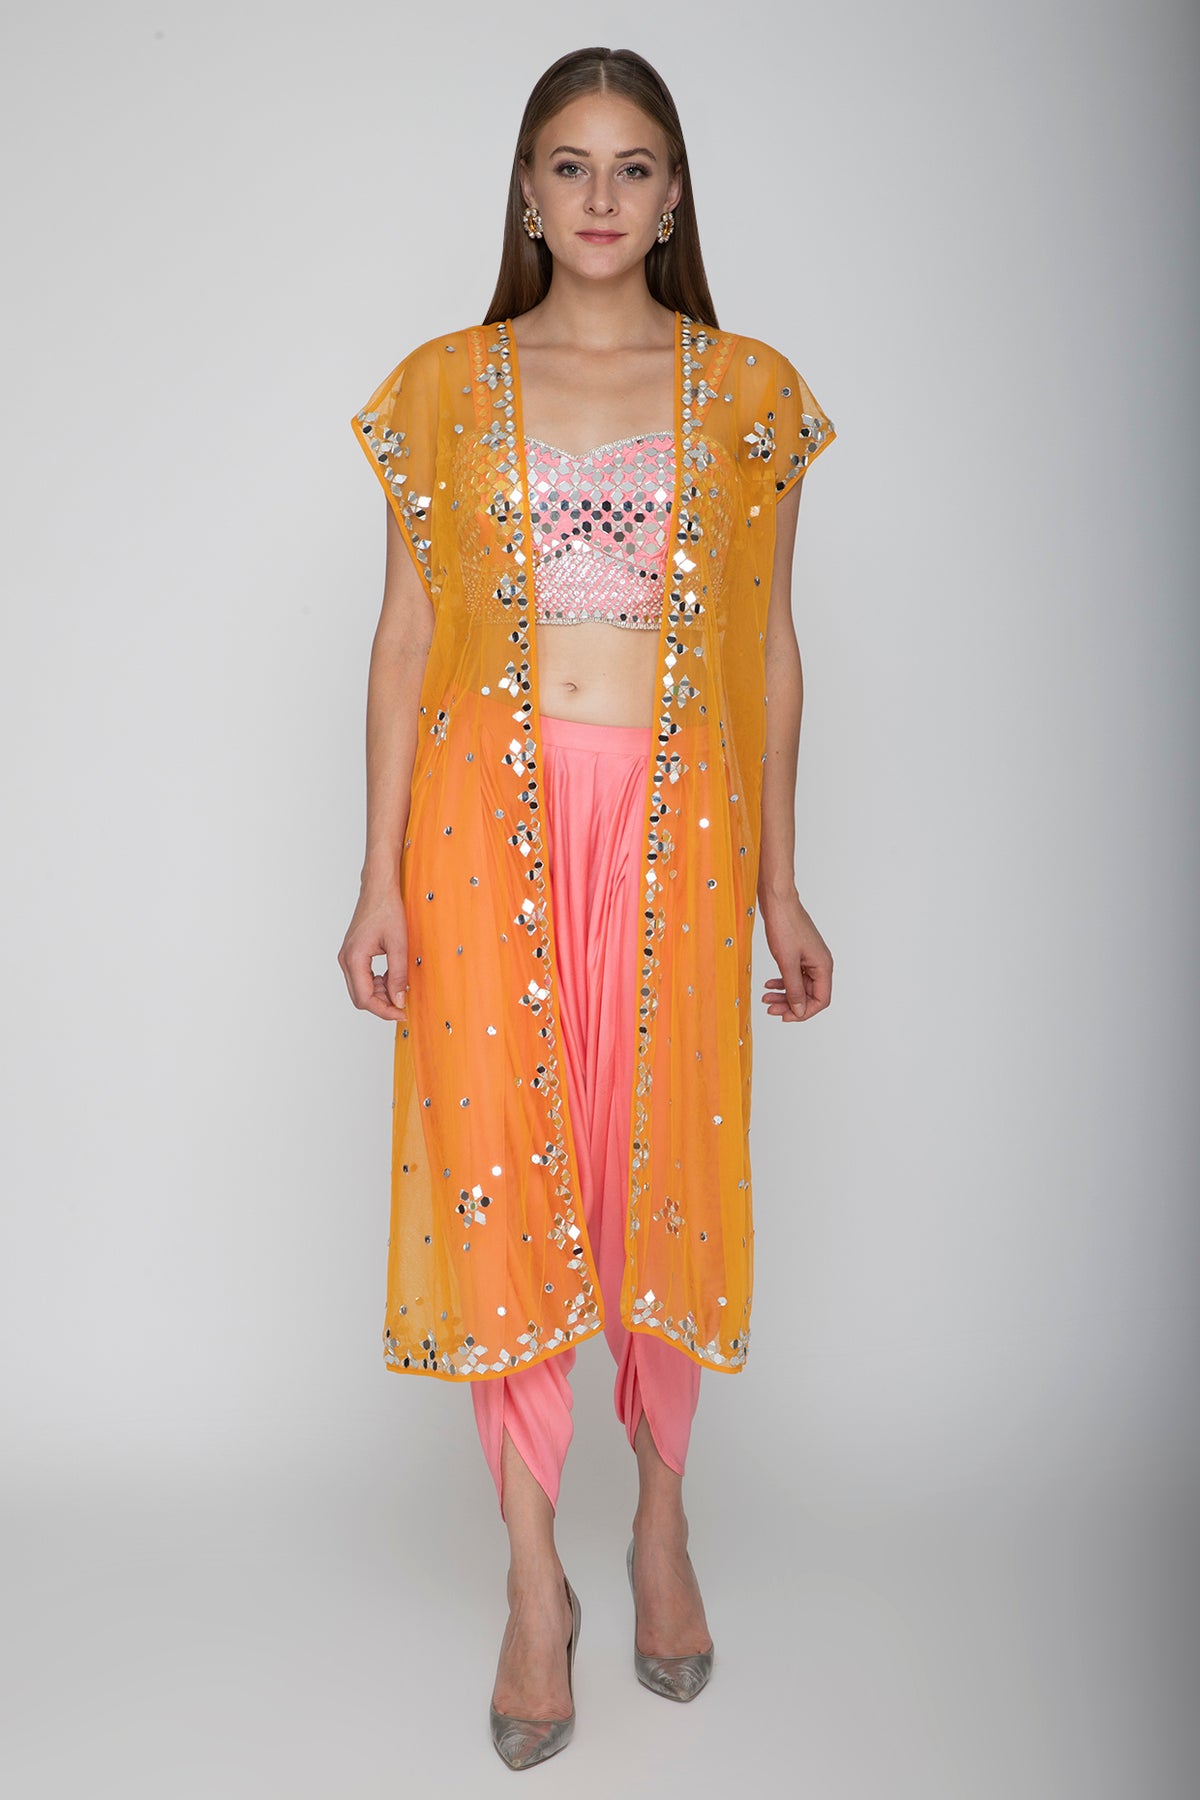 Blush Pink Embroidered Blouse With Dhoti Pants & Orange Cape